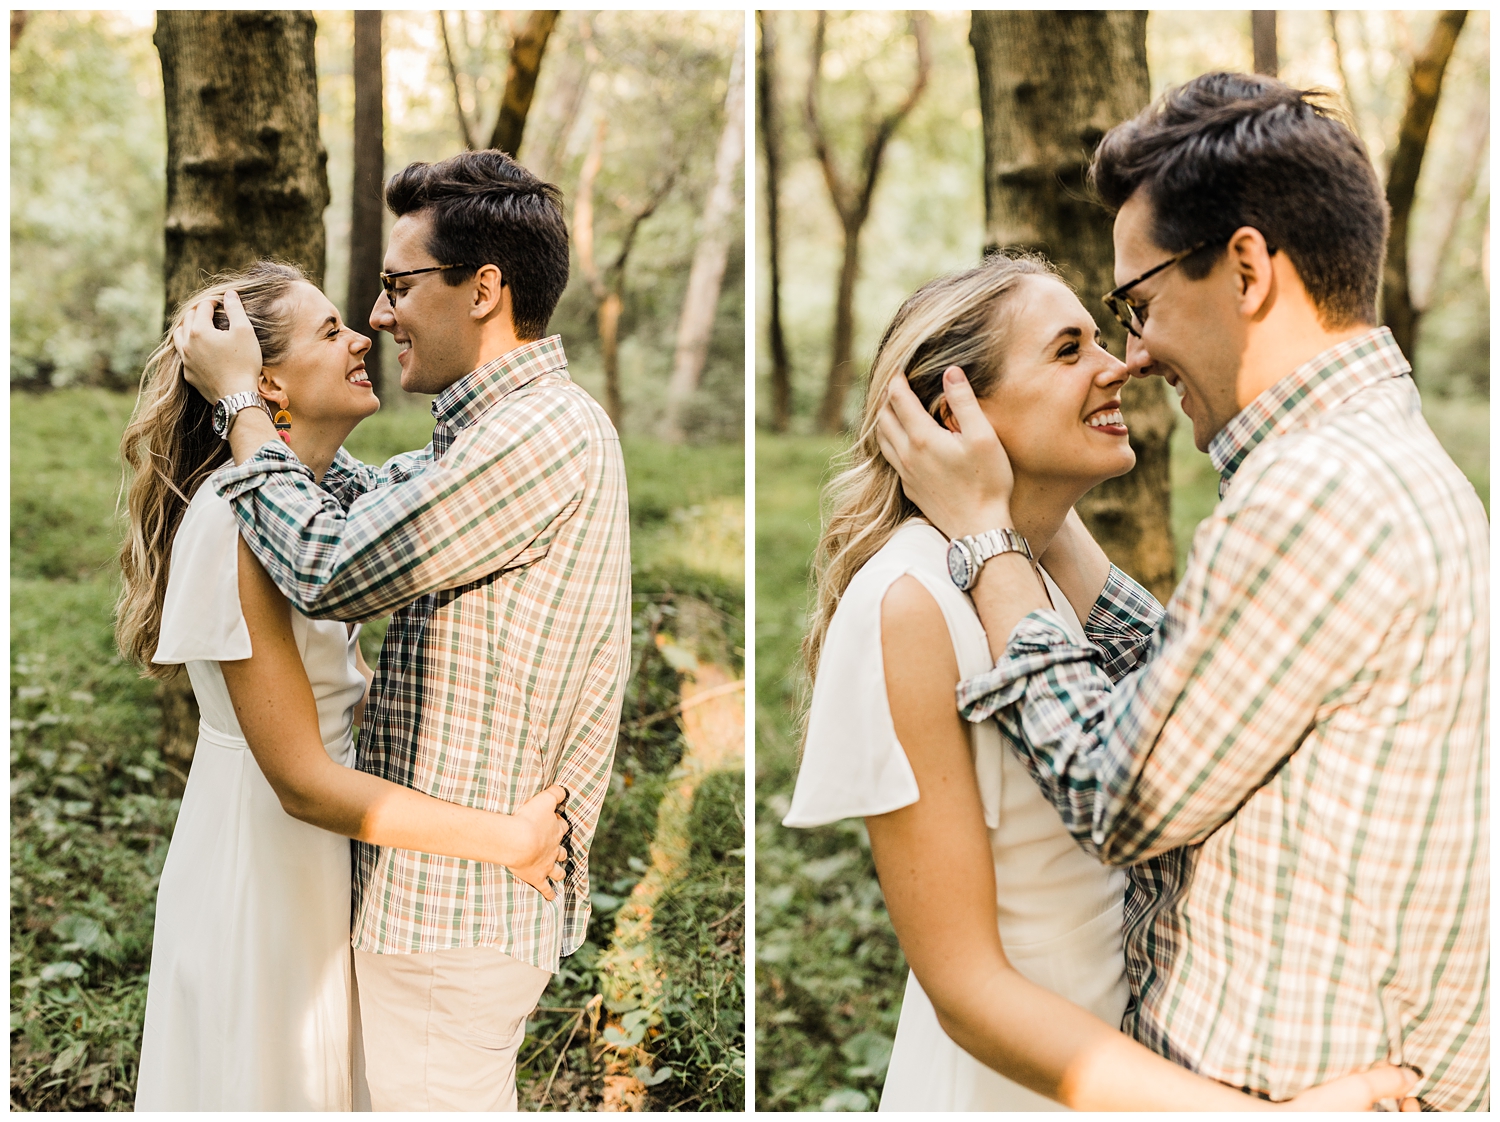 Newly engaged couple in Lullwater Park hugging during an engagement session in a lush, green forest in Atlanta, GA